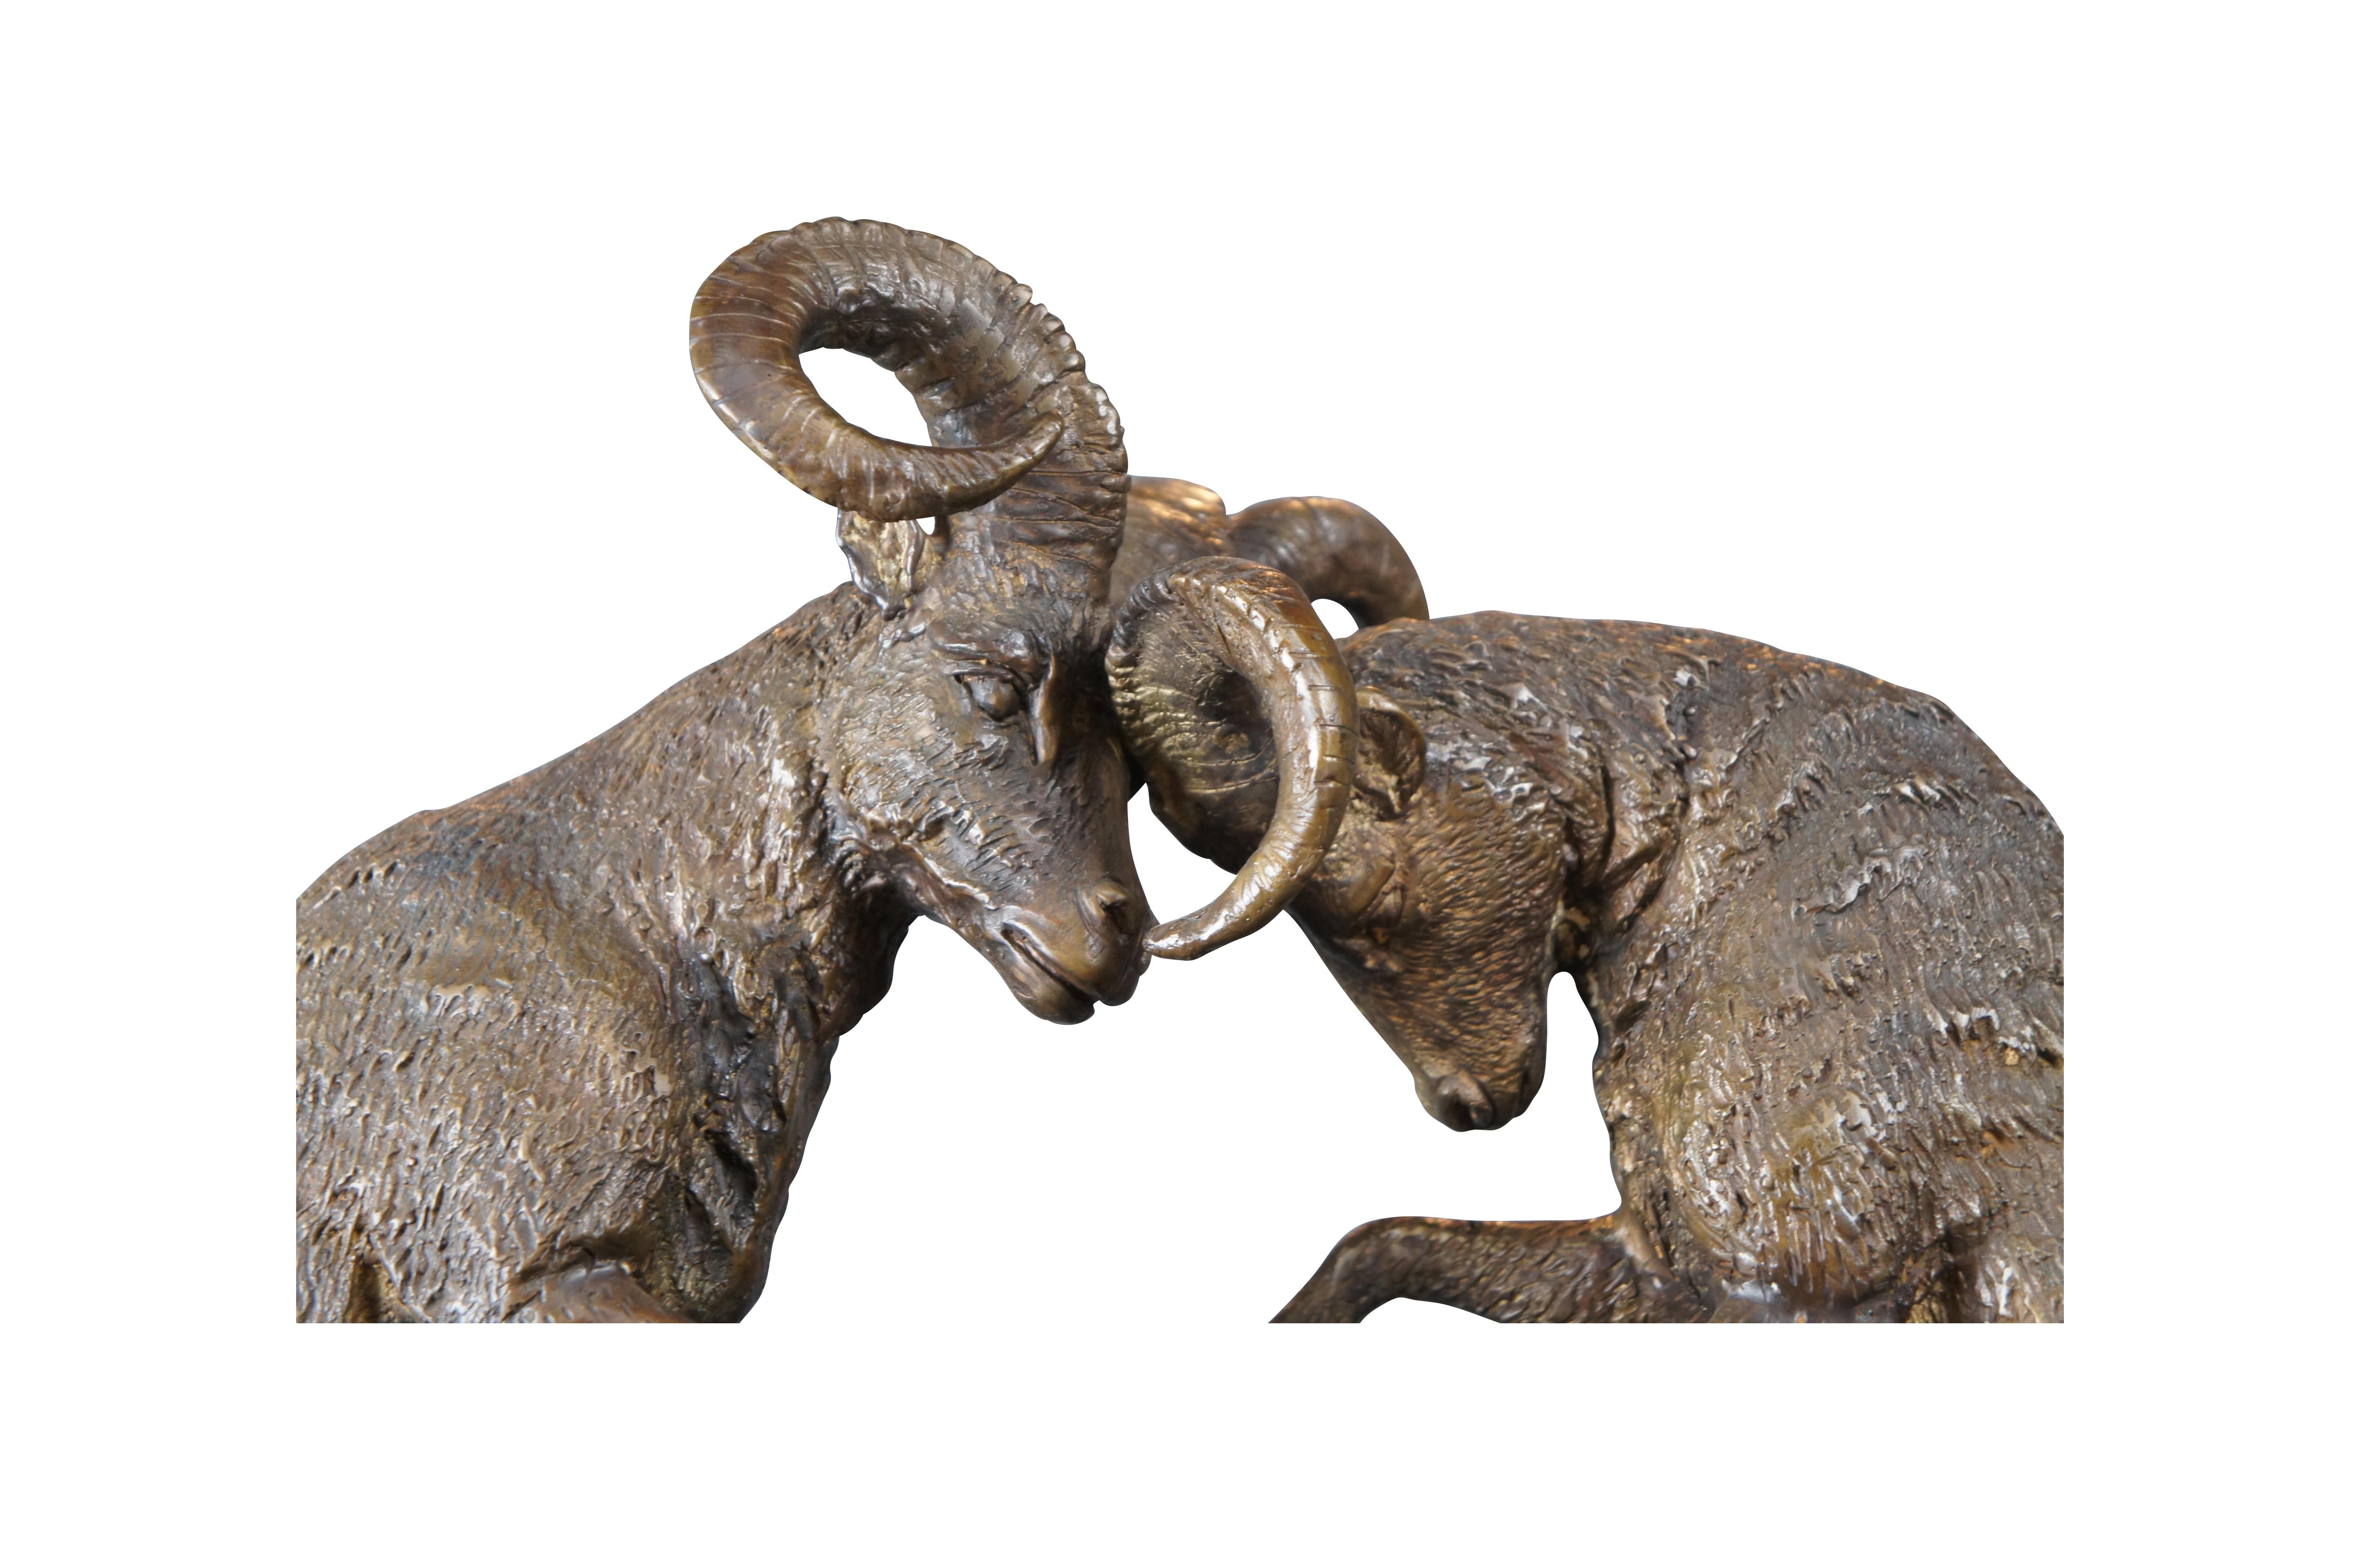 Large Signed Lost Wax Bronze Sculpture of Fighting Rams. Features two bucking / fighting mountain rams. Well detailed with fur, horns, facial features over a marble base. Signature monogram ETL on surface.

Dimensions:
30